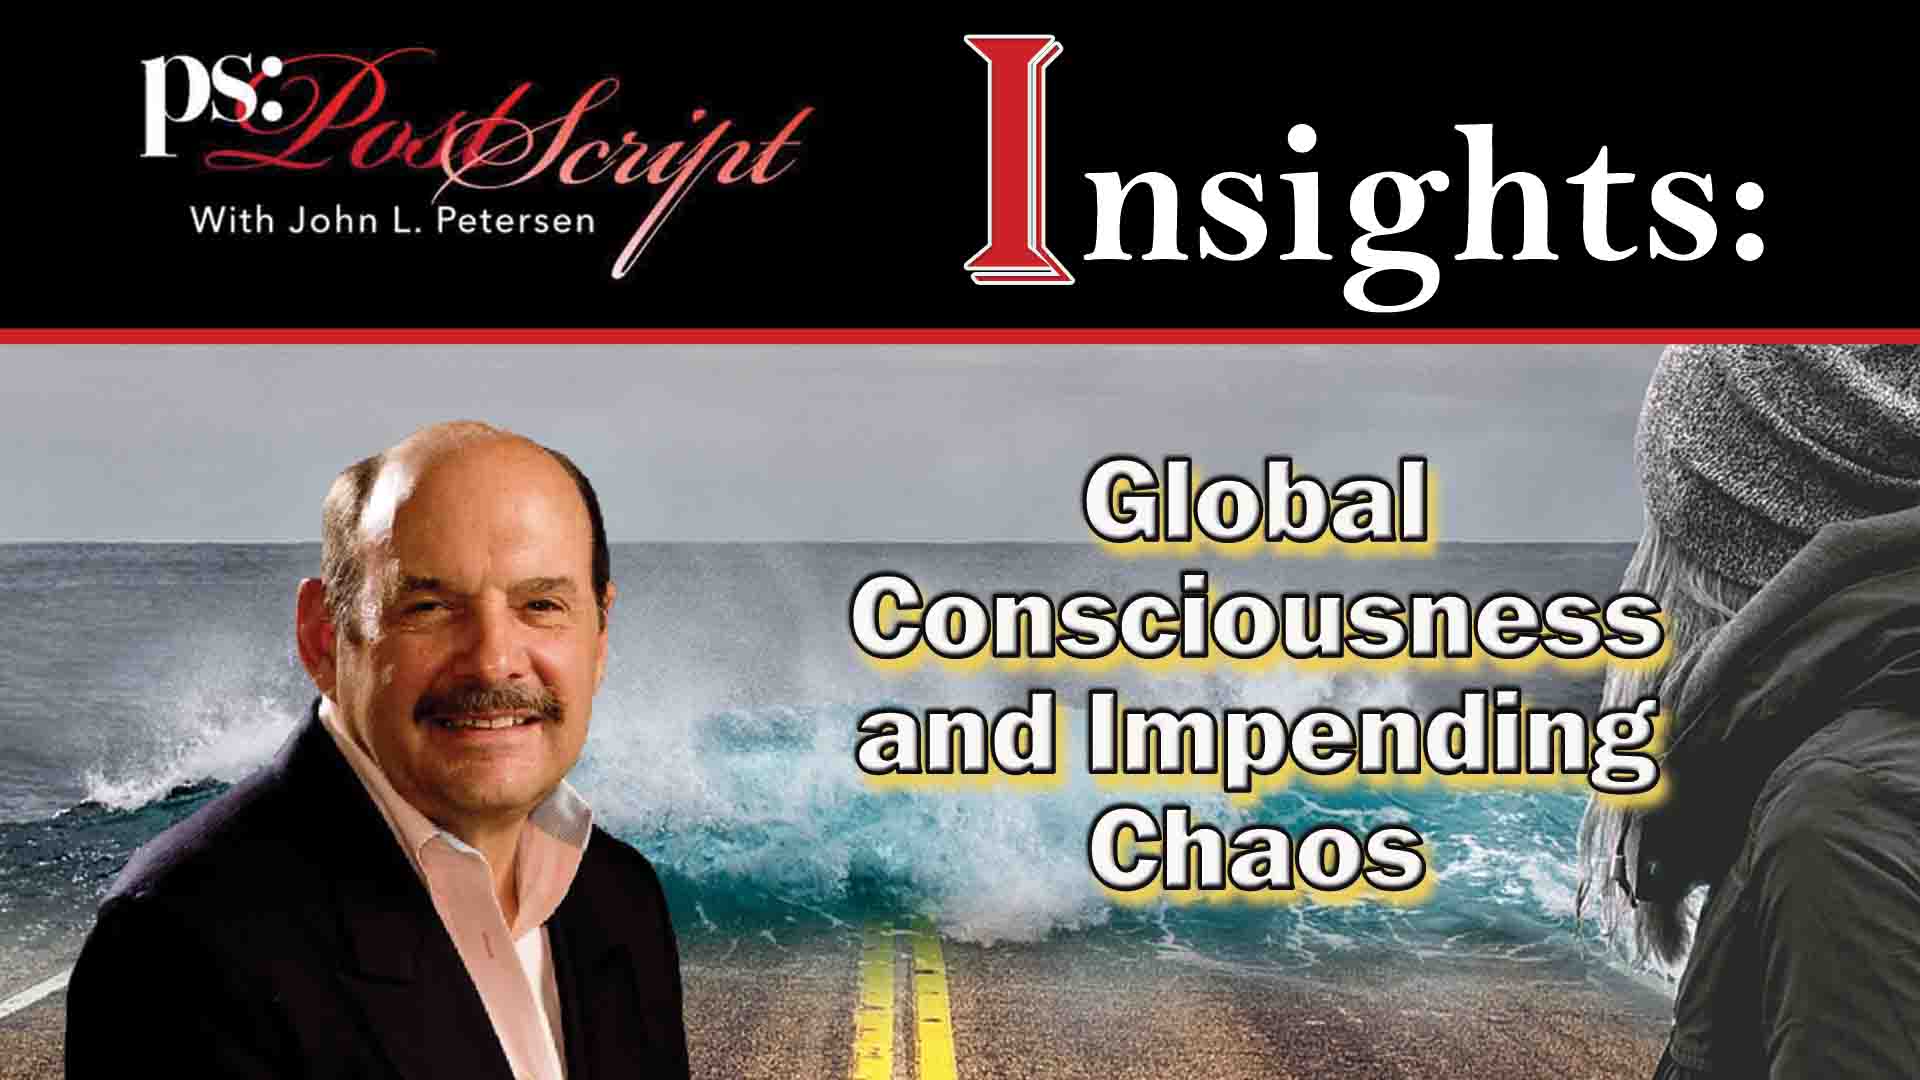 PostScript Insight - Global Consciousness and Impending Chaos